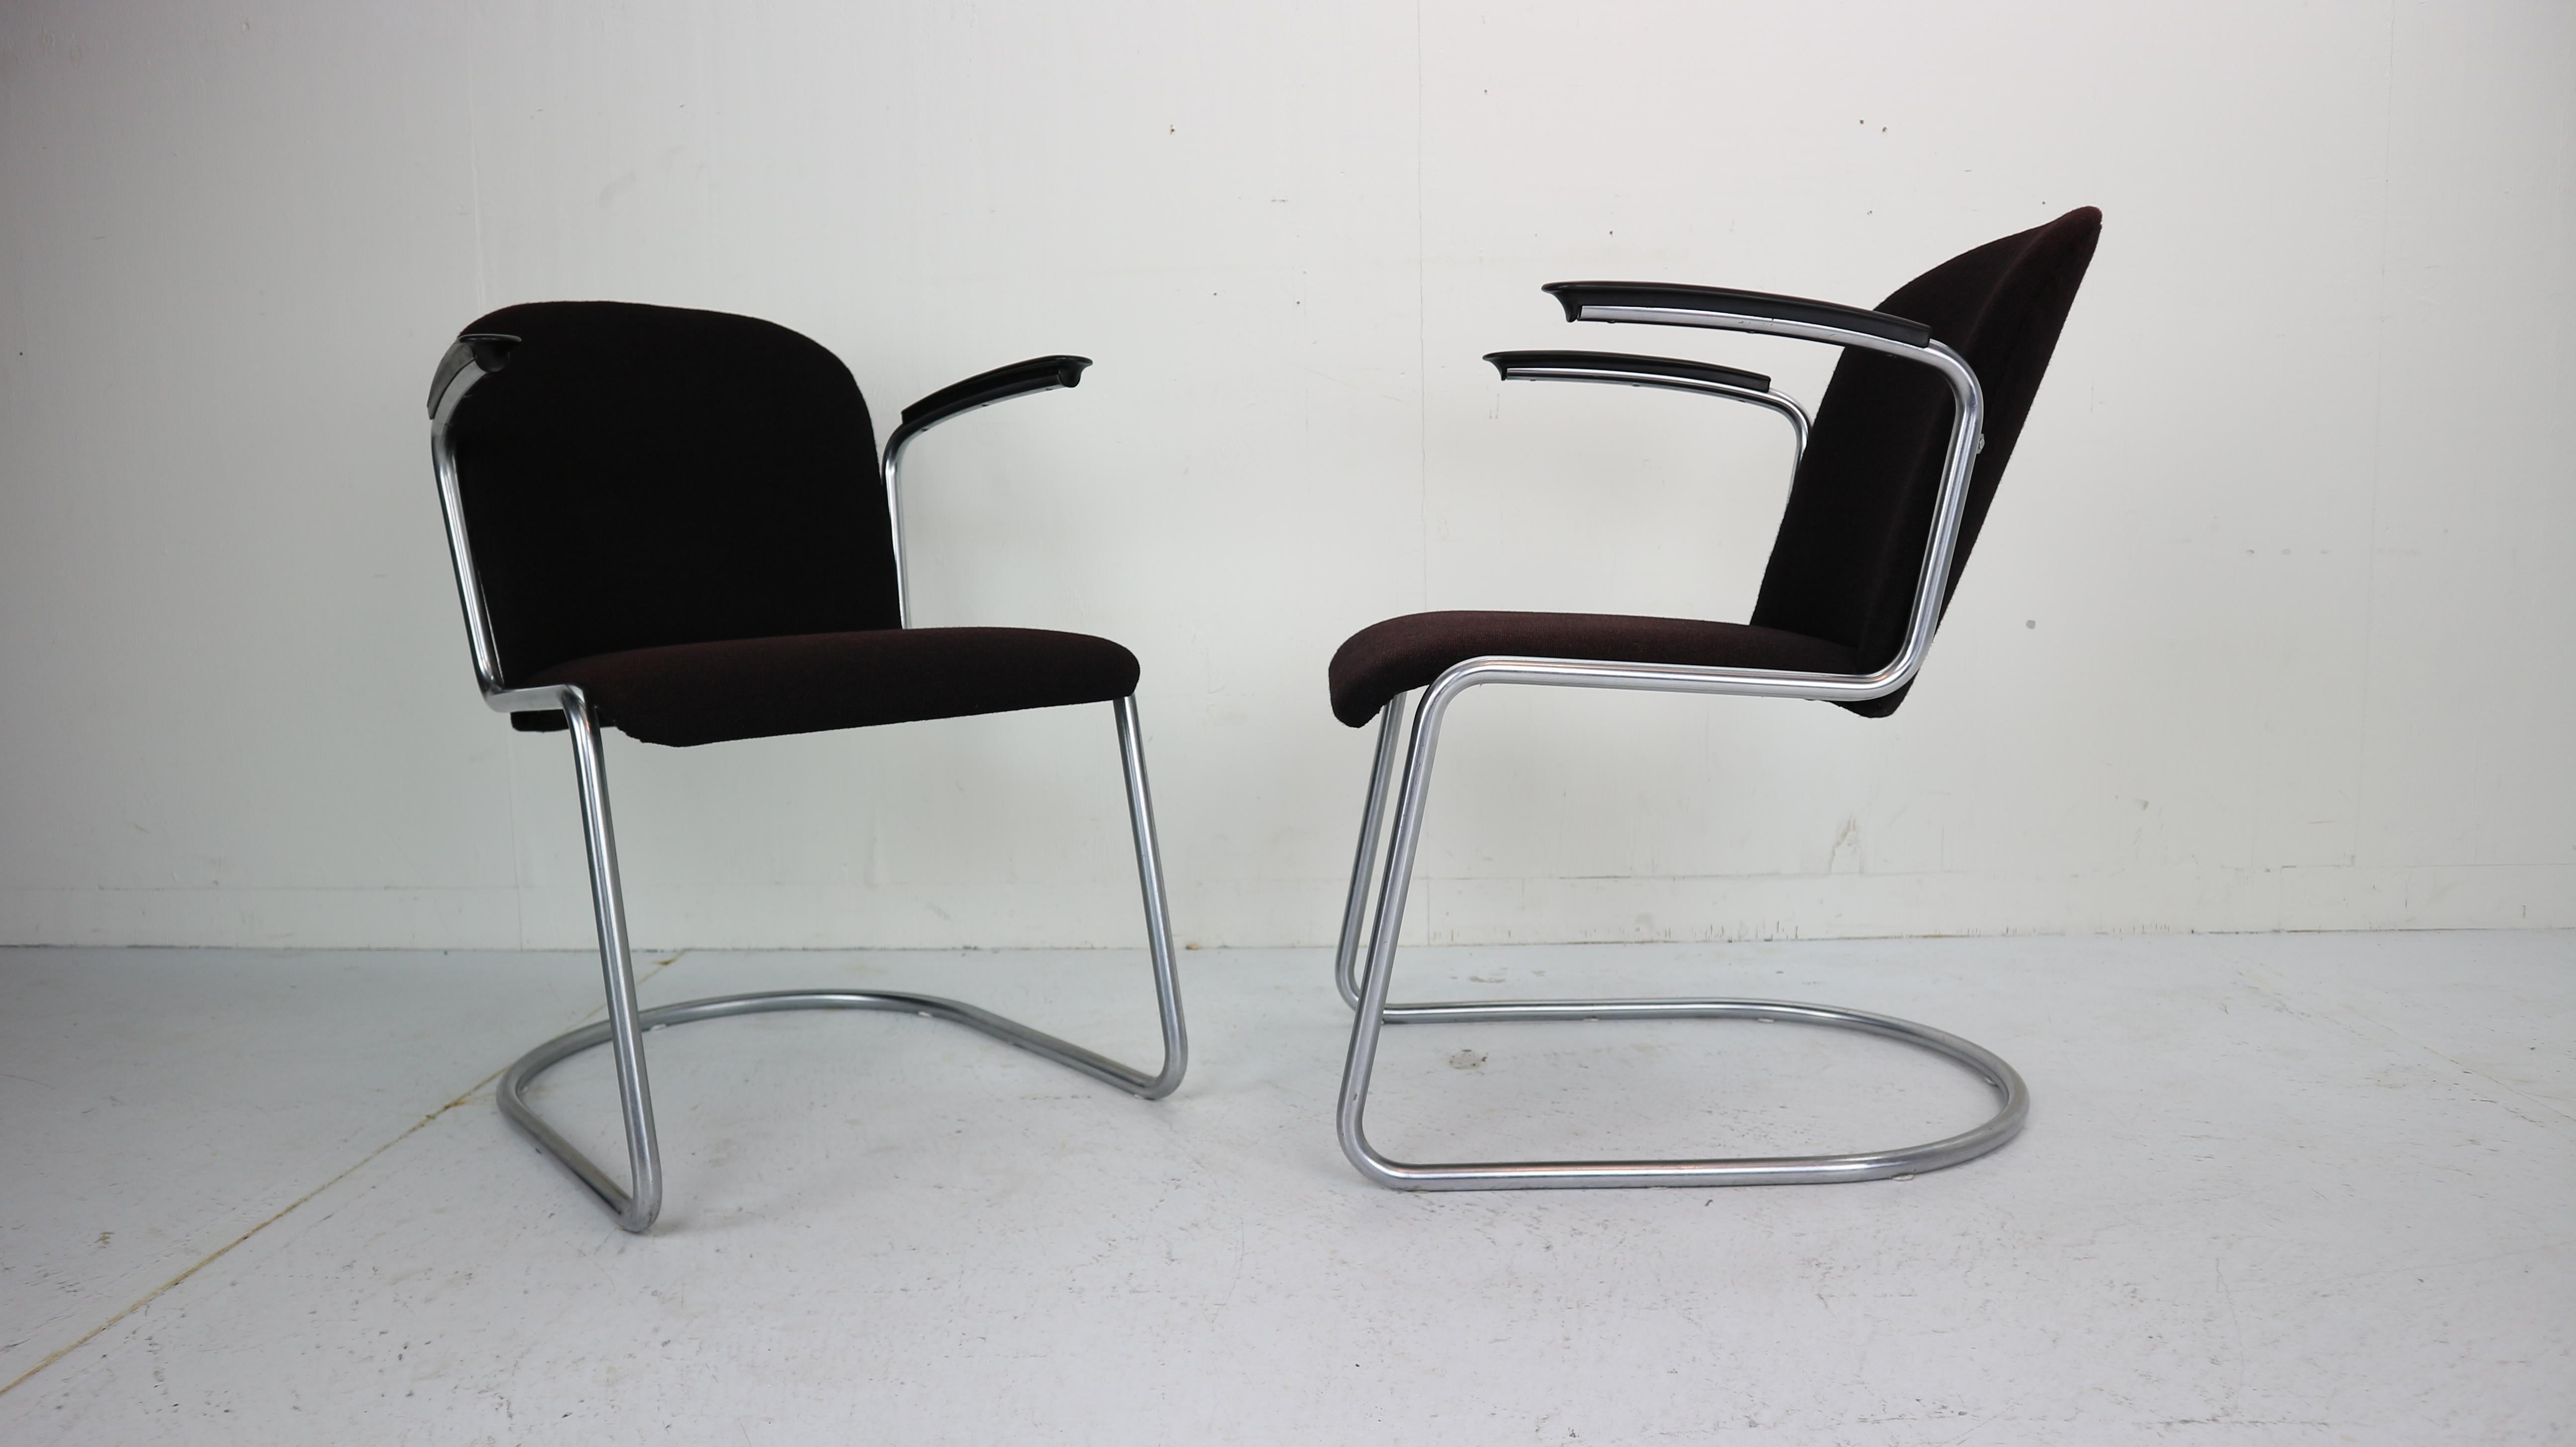 This pair of easy armchair are designed by W.H. Gipsen for Gipsen Culemborg and manufactured in 1953, Netherlands.
Model number- 413.
Chrome version, very comfortable original easy chair with original dark brown color upholstery including the